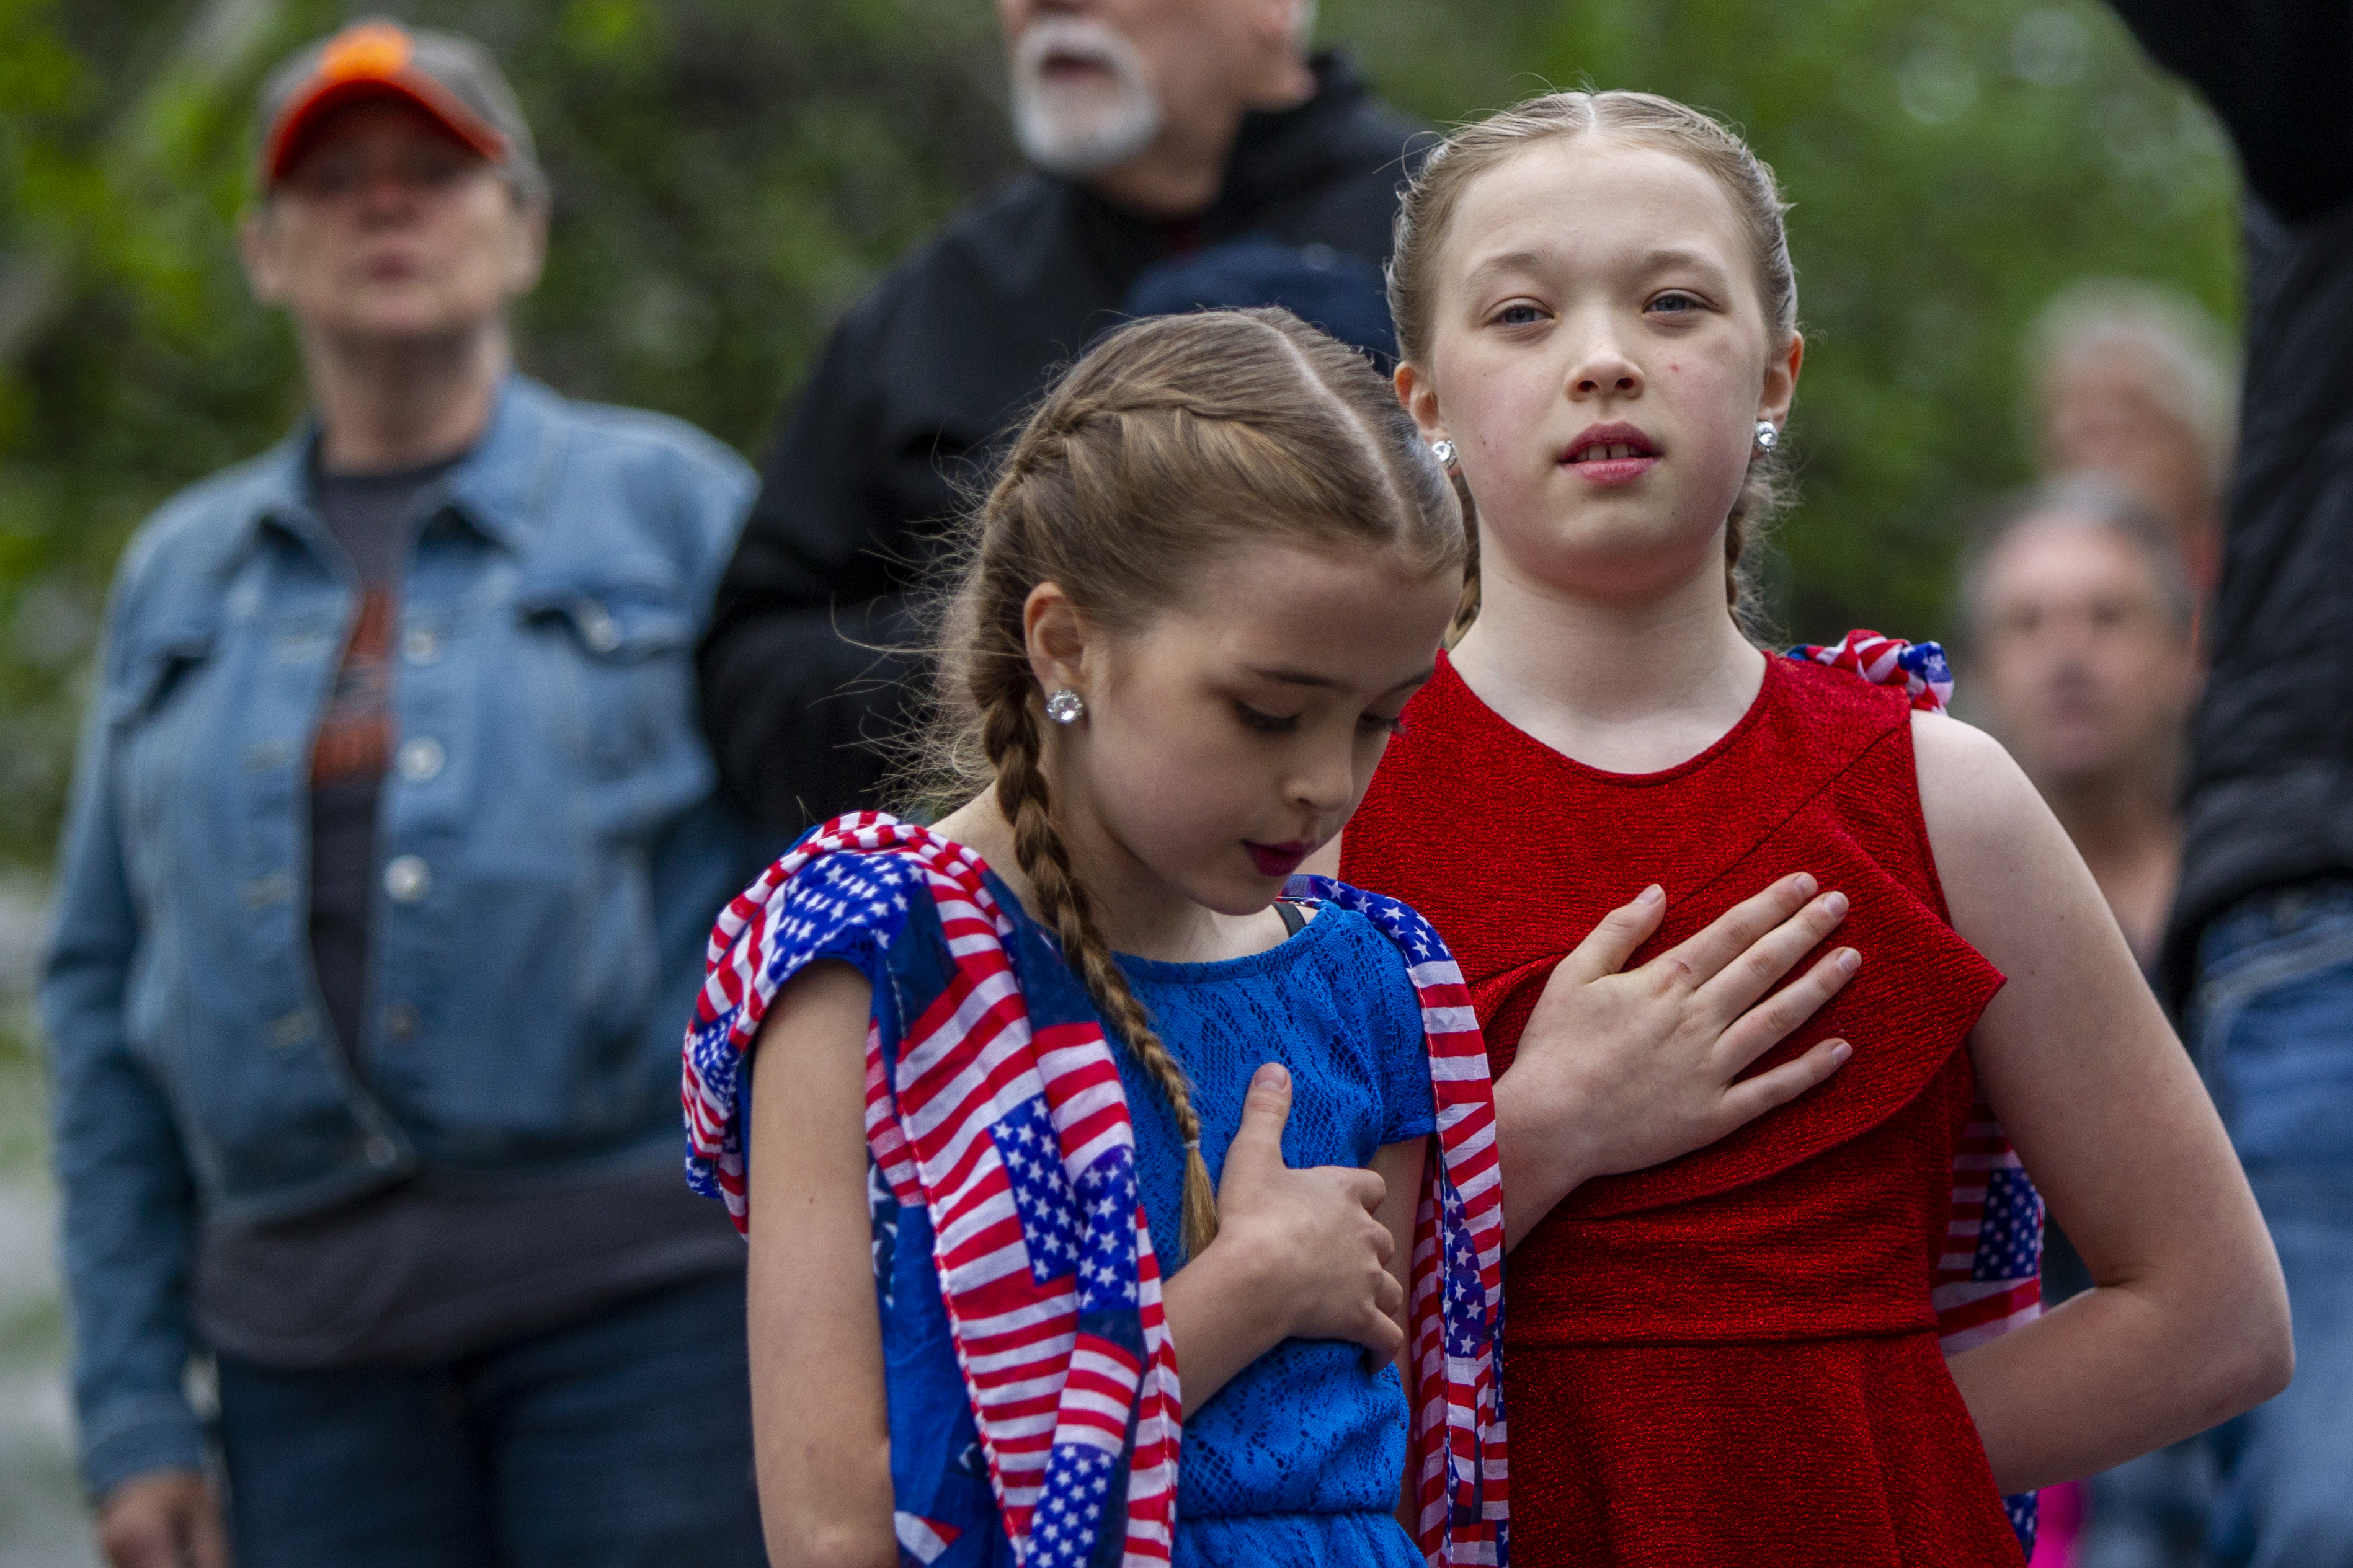 Gracee, 10, left, and Hayden Heikkila, 13, stand for "The Star-Spangled Banner" during the "American Patriot Rally-Sheriffs speak out" event at Rosa Parks Circle in downtown Grand Rapids on Monday, May 18, 2020. The crowd is protesting against Gov. Gretchen Whitmer's stay-at-home order. The sisters are from Battle Creek. (Cory Morse | MLive.com)